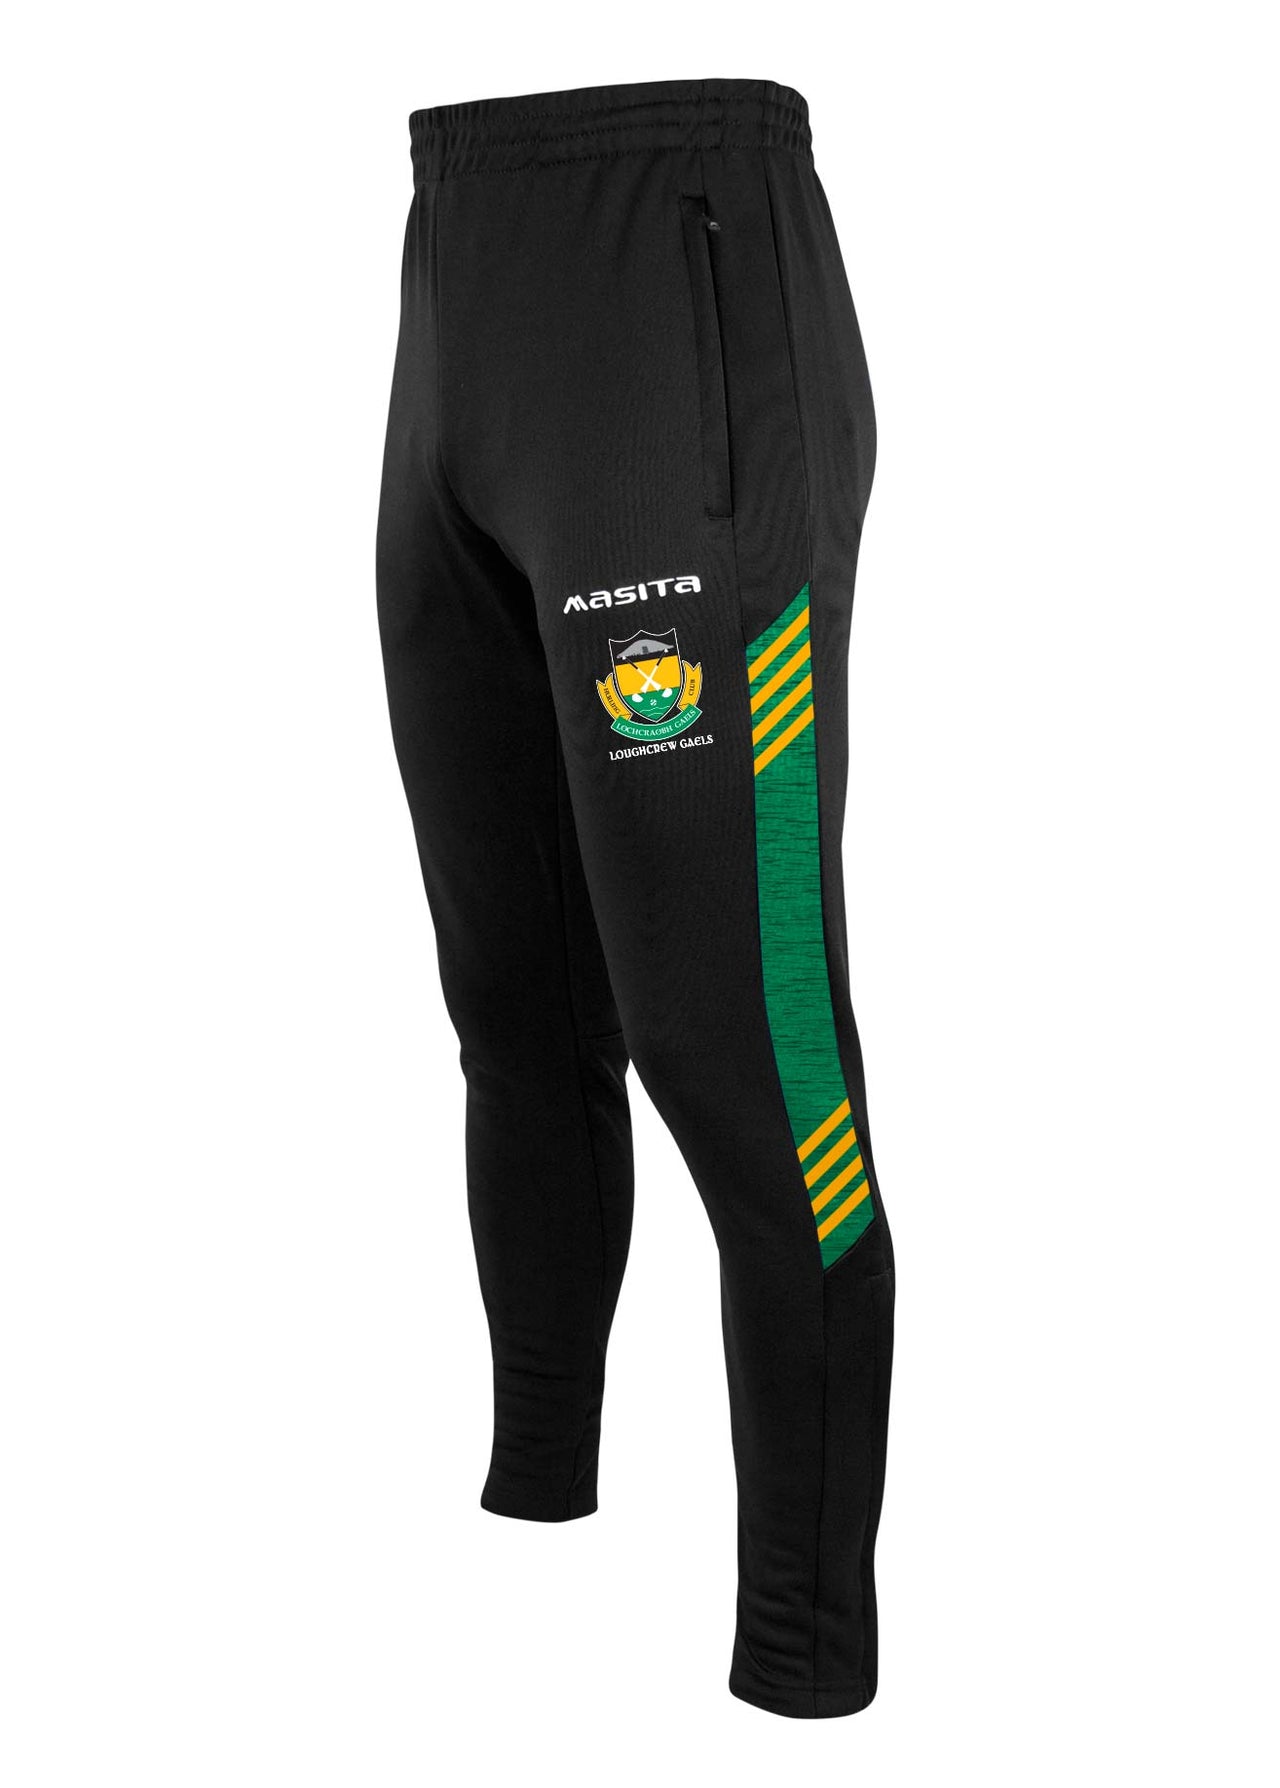 Loughcrew Gaels Hydro Skinny Bottoms Adults